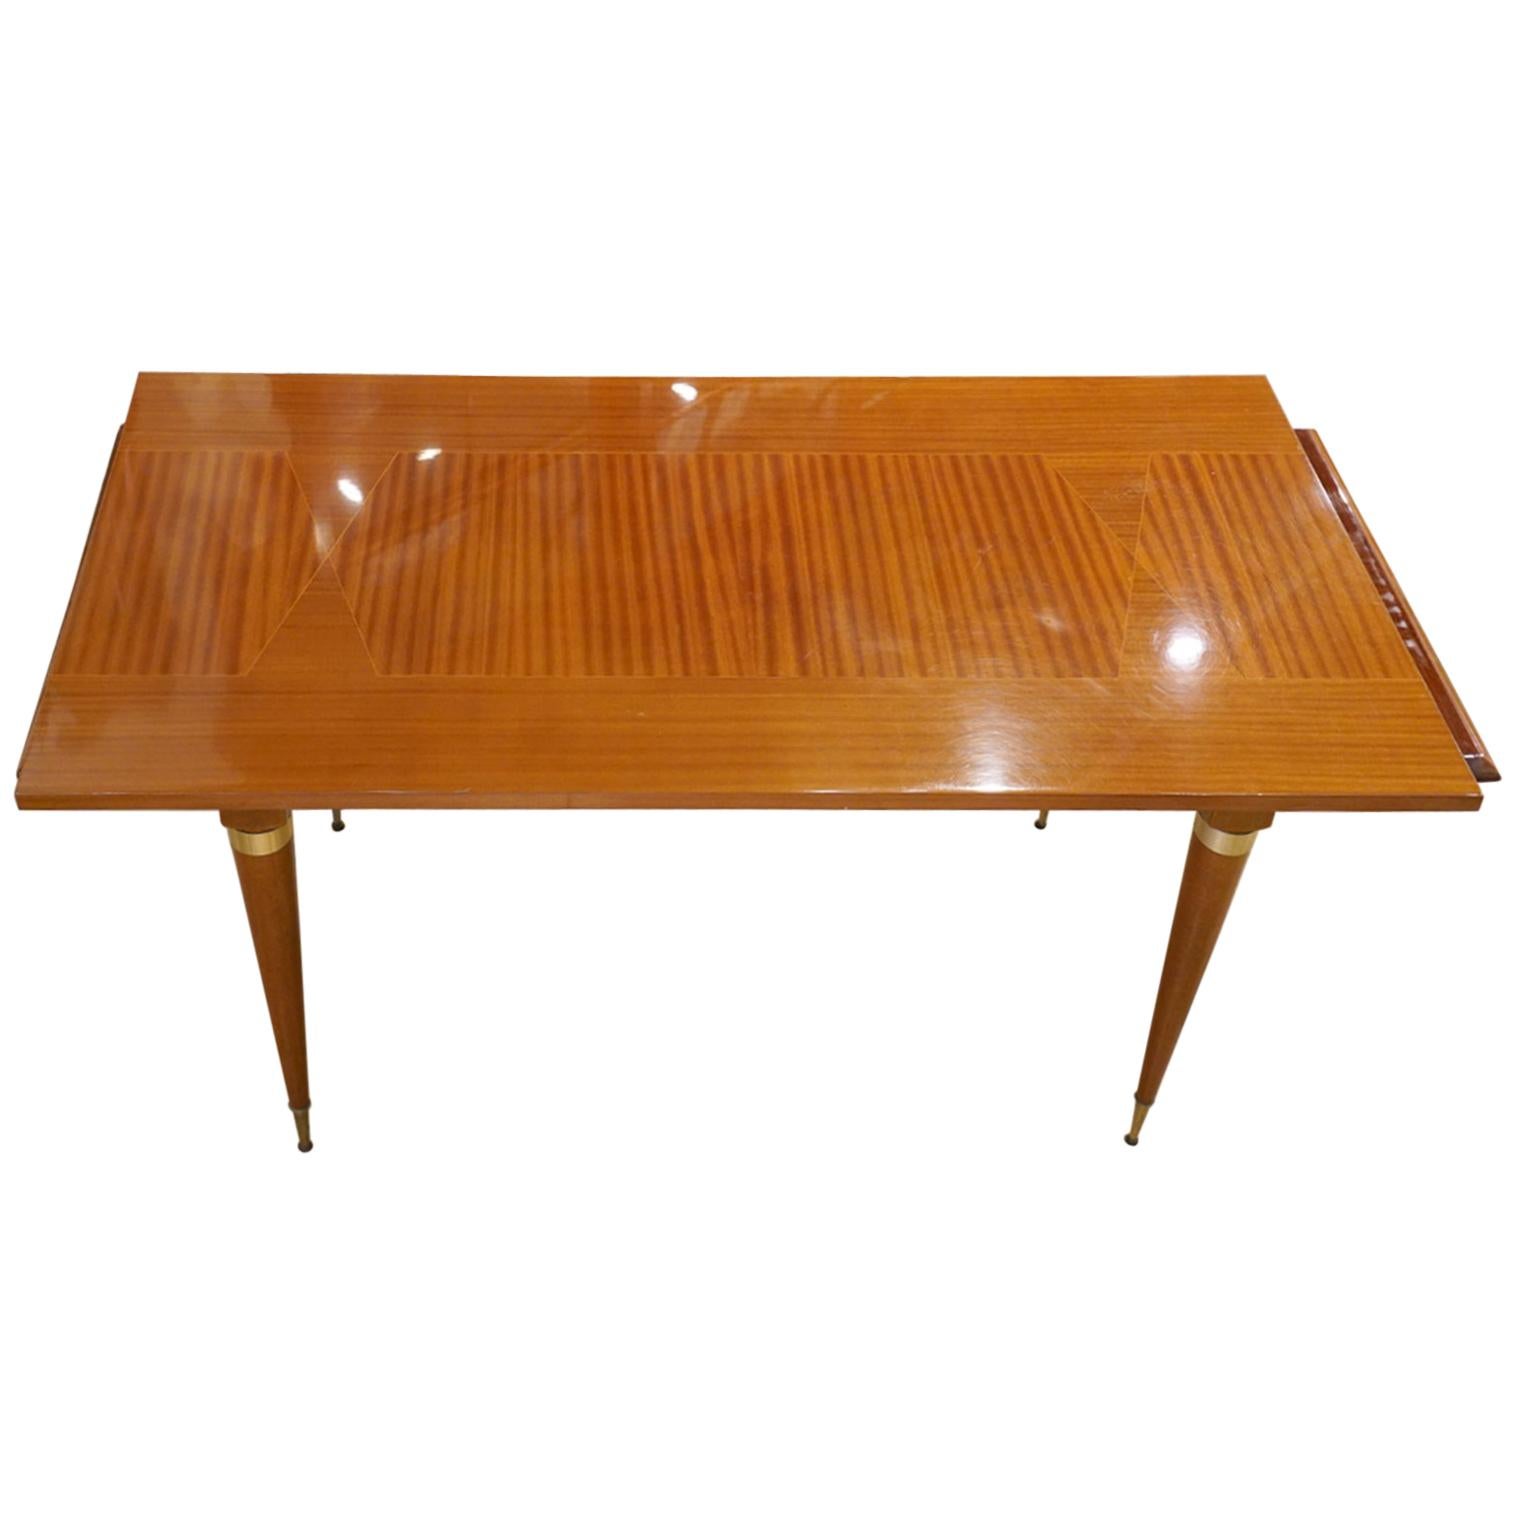 Italian Vintage Paolo Buffa Inspired Extendable Parquetry Dining Table